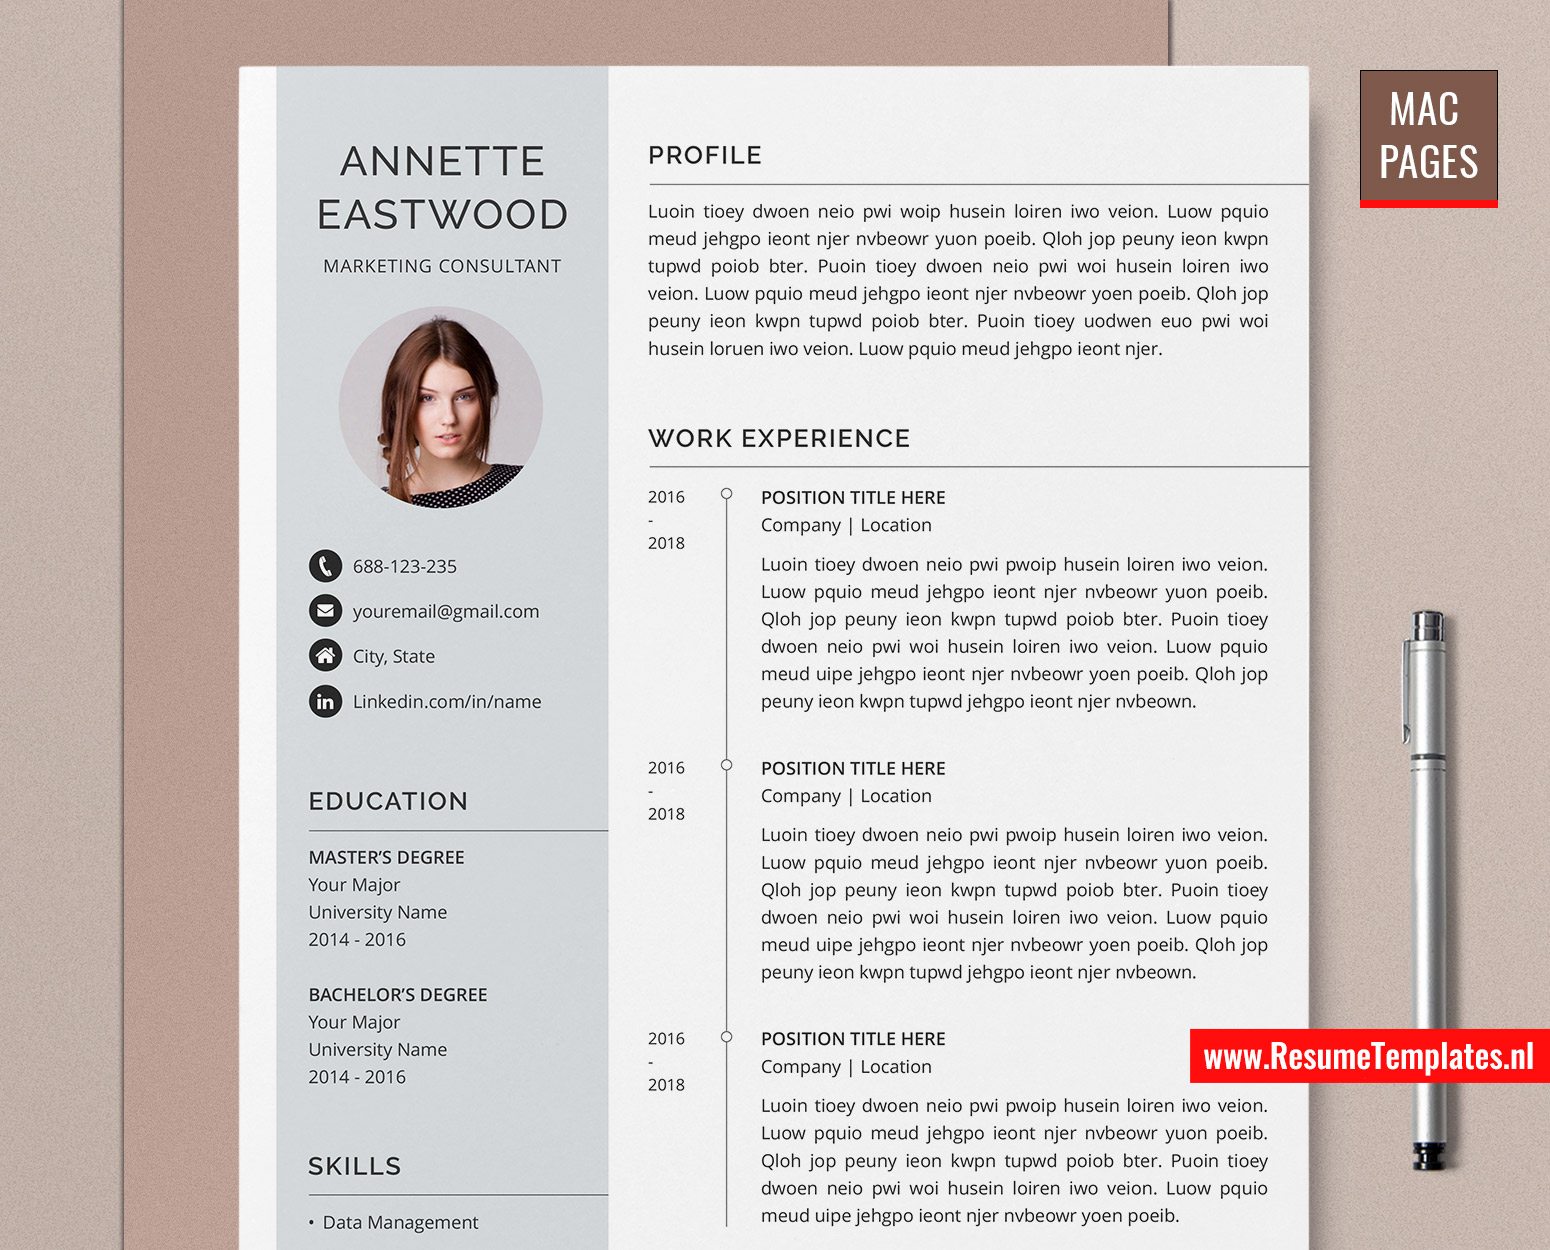 For Mac Pages: Professional Resume Template / CV Template for Mac Pages